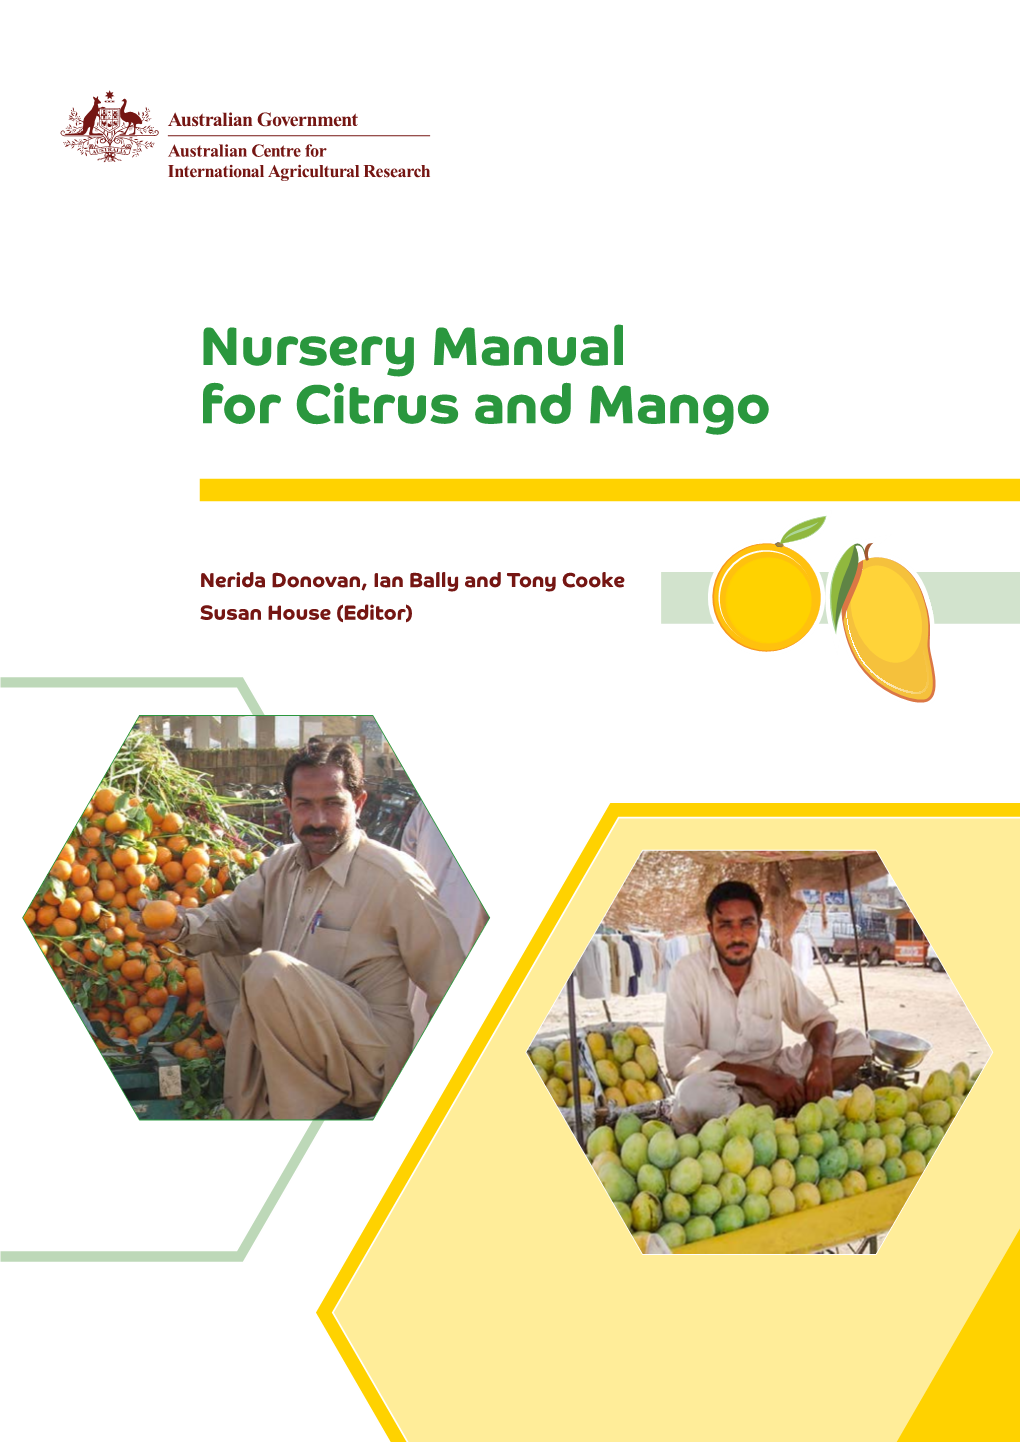 Nursery Manual for Citrus and Mango